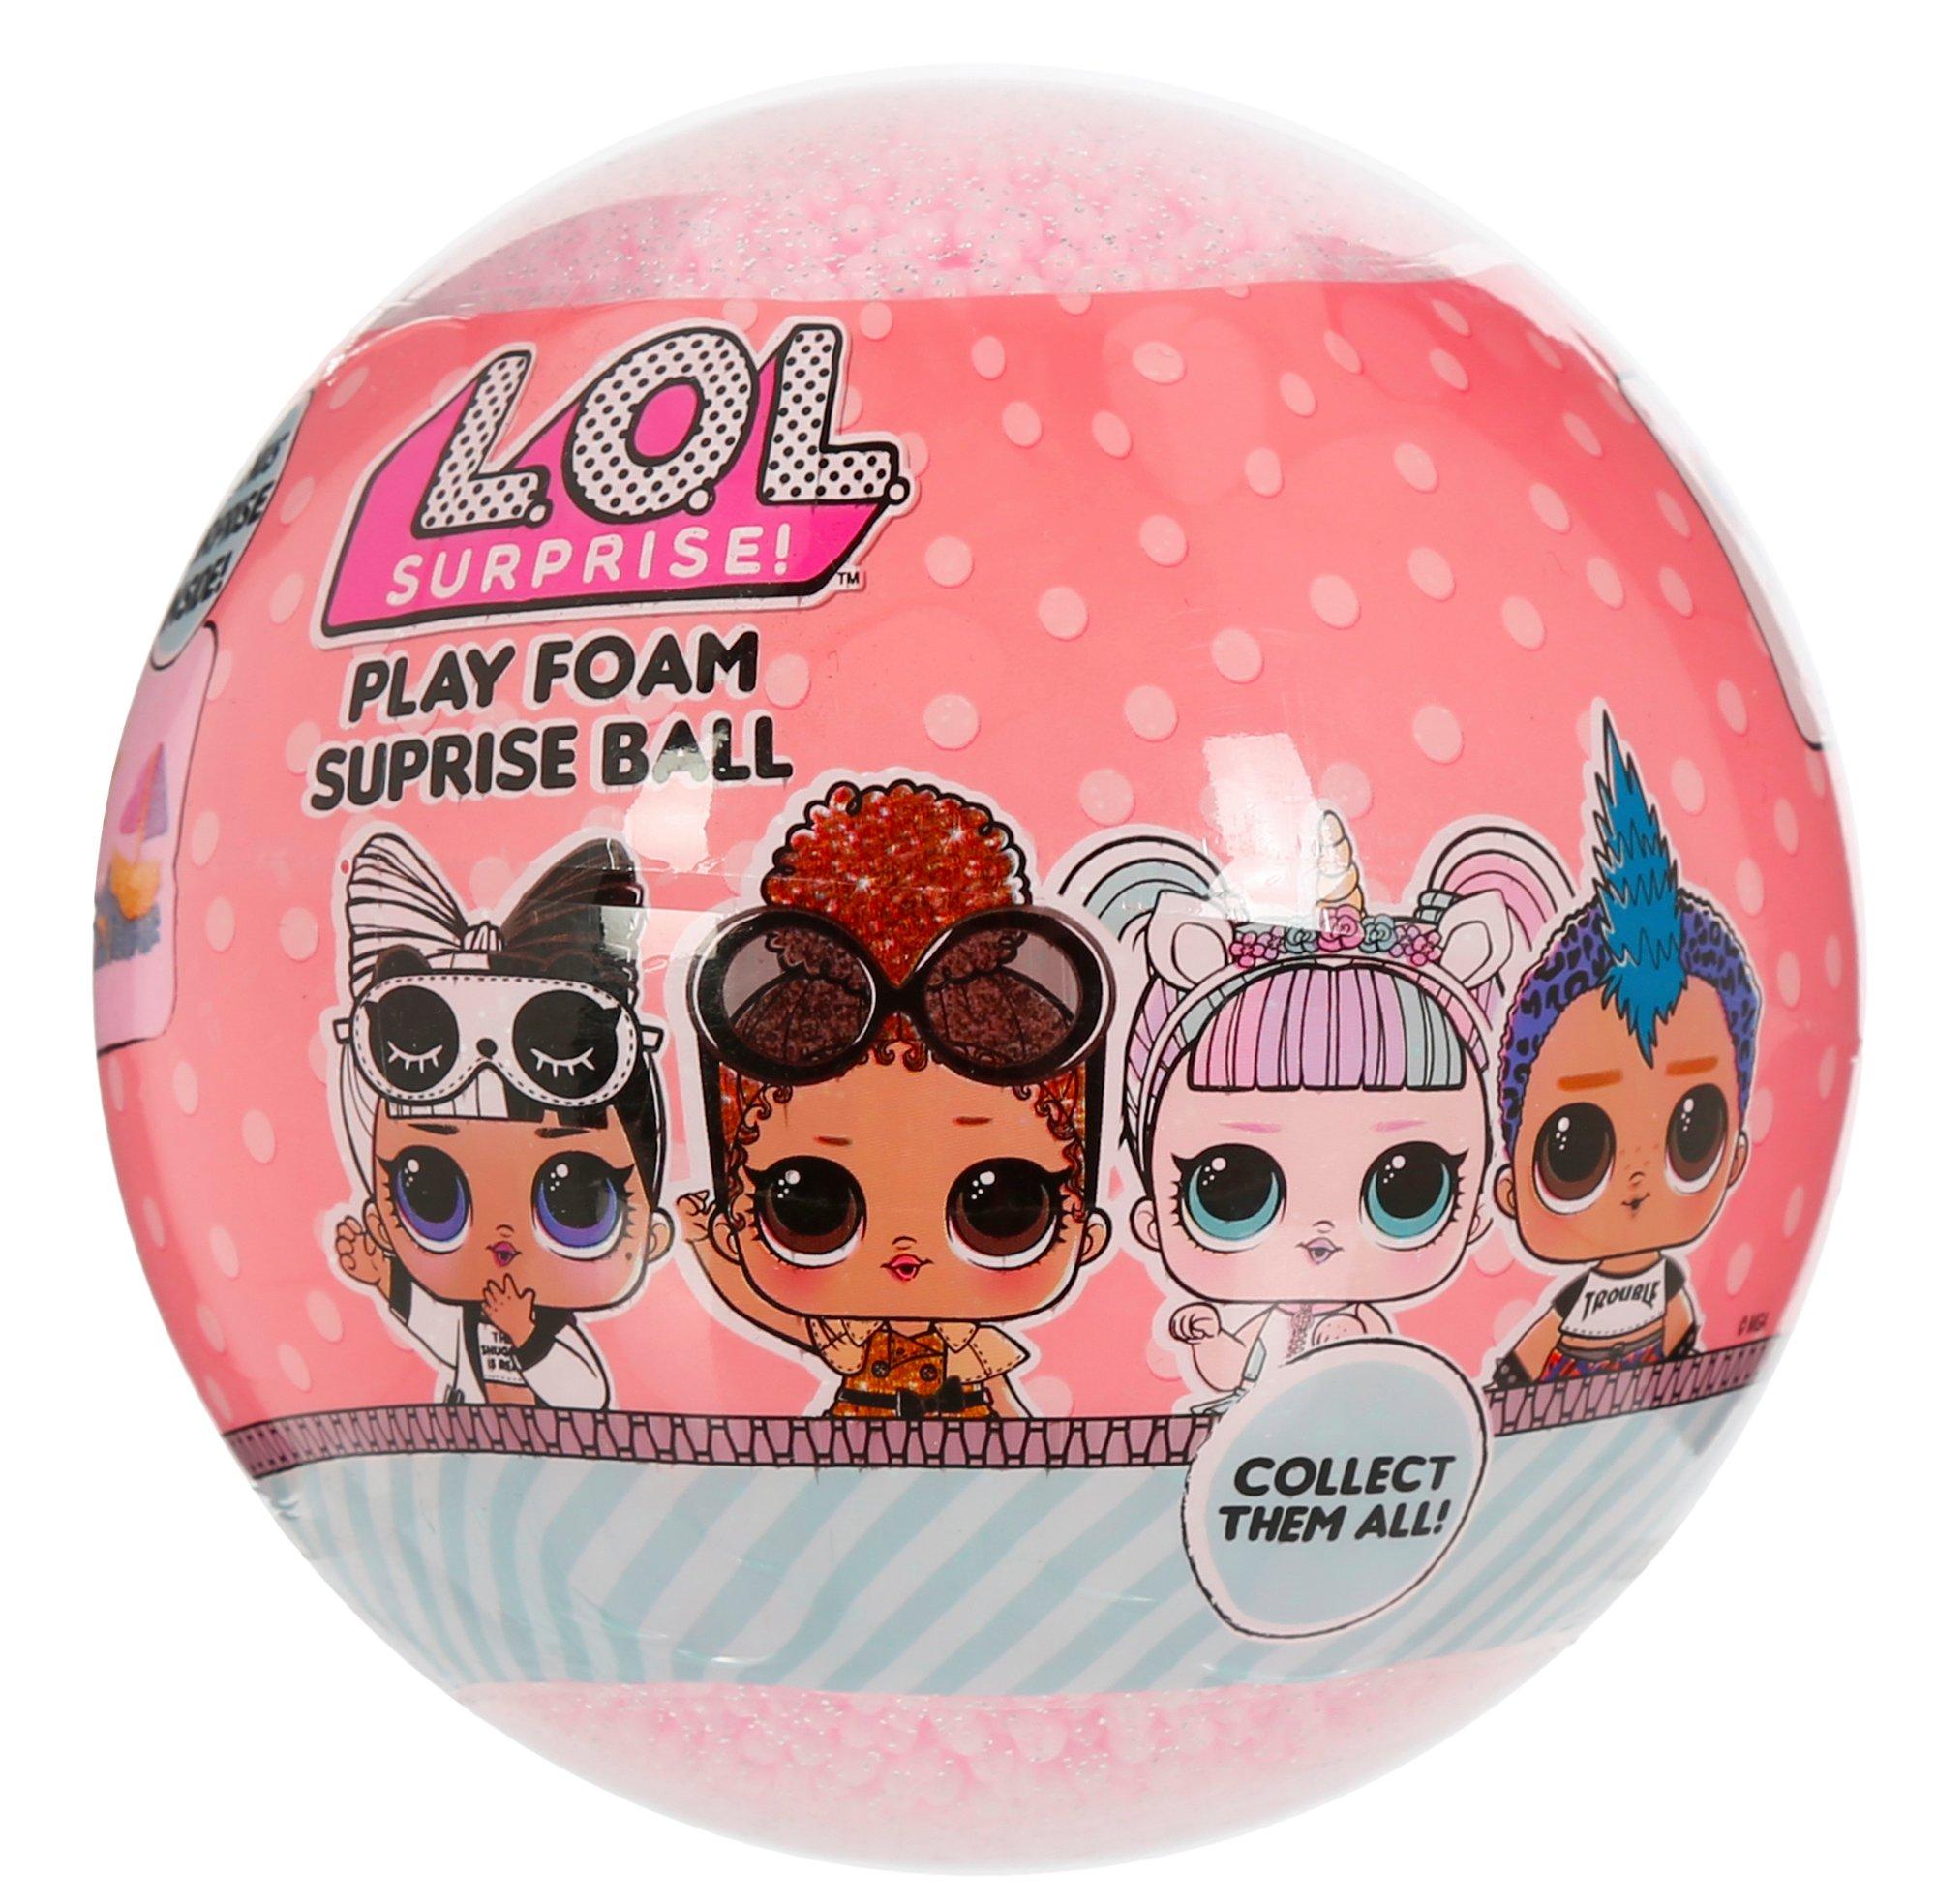 what is inside a lol surprise ball